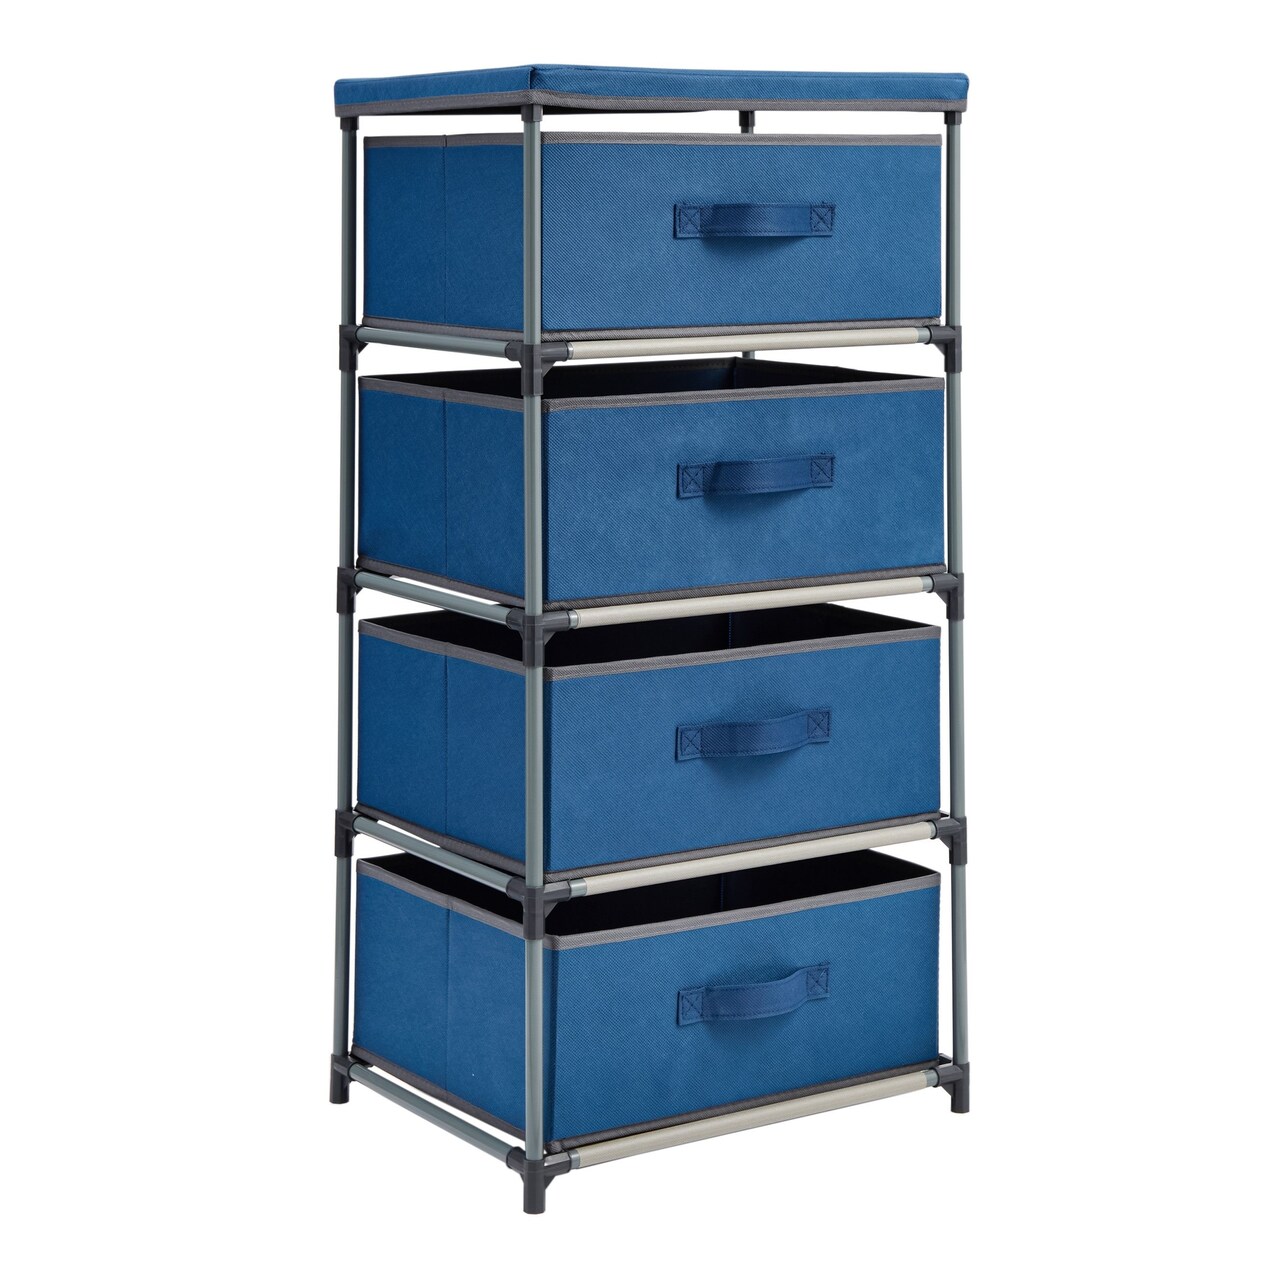 4 Drawer Dresser for Bedroom, Clothes Organizer Fabric Storage Tower for Clothing, Linens, Closet (Navy Blue 16.5 x 33 In)